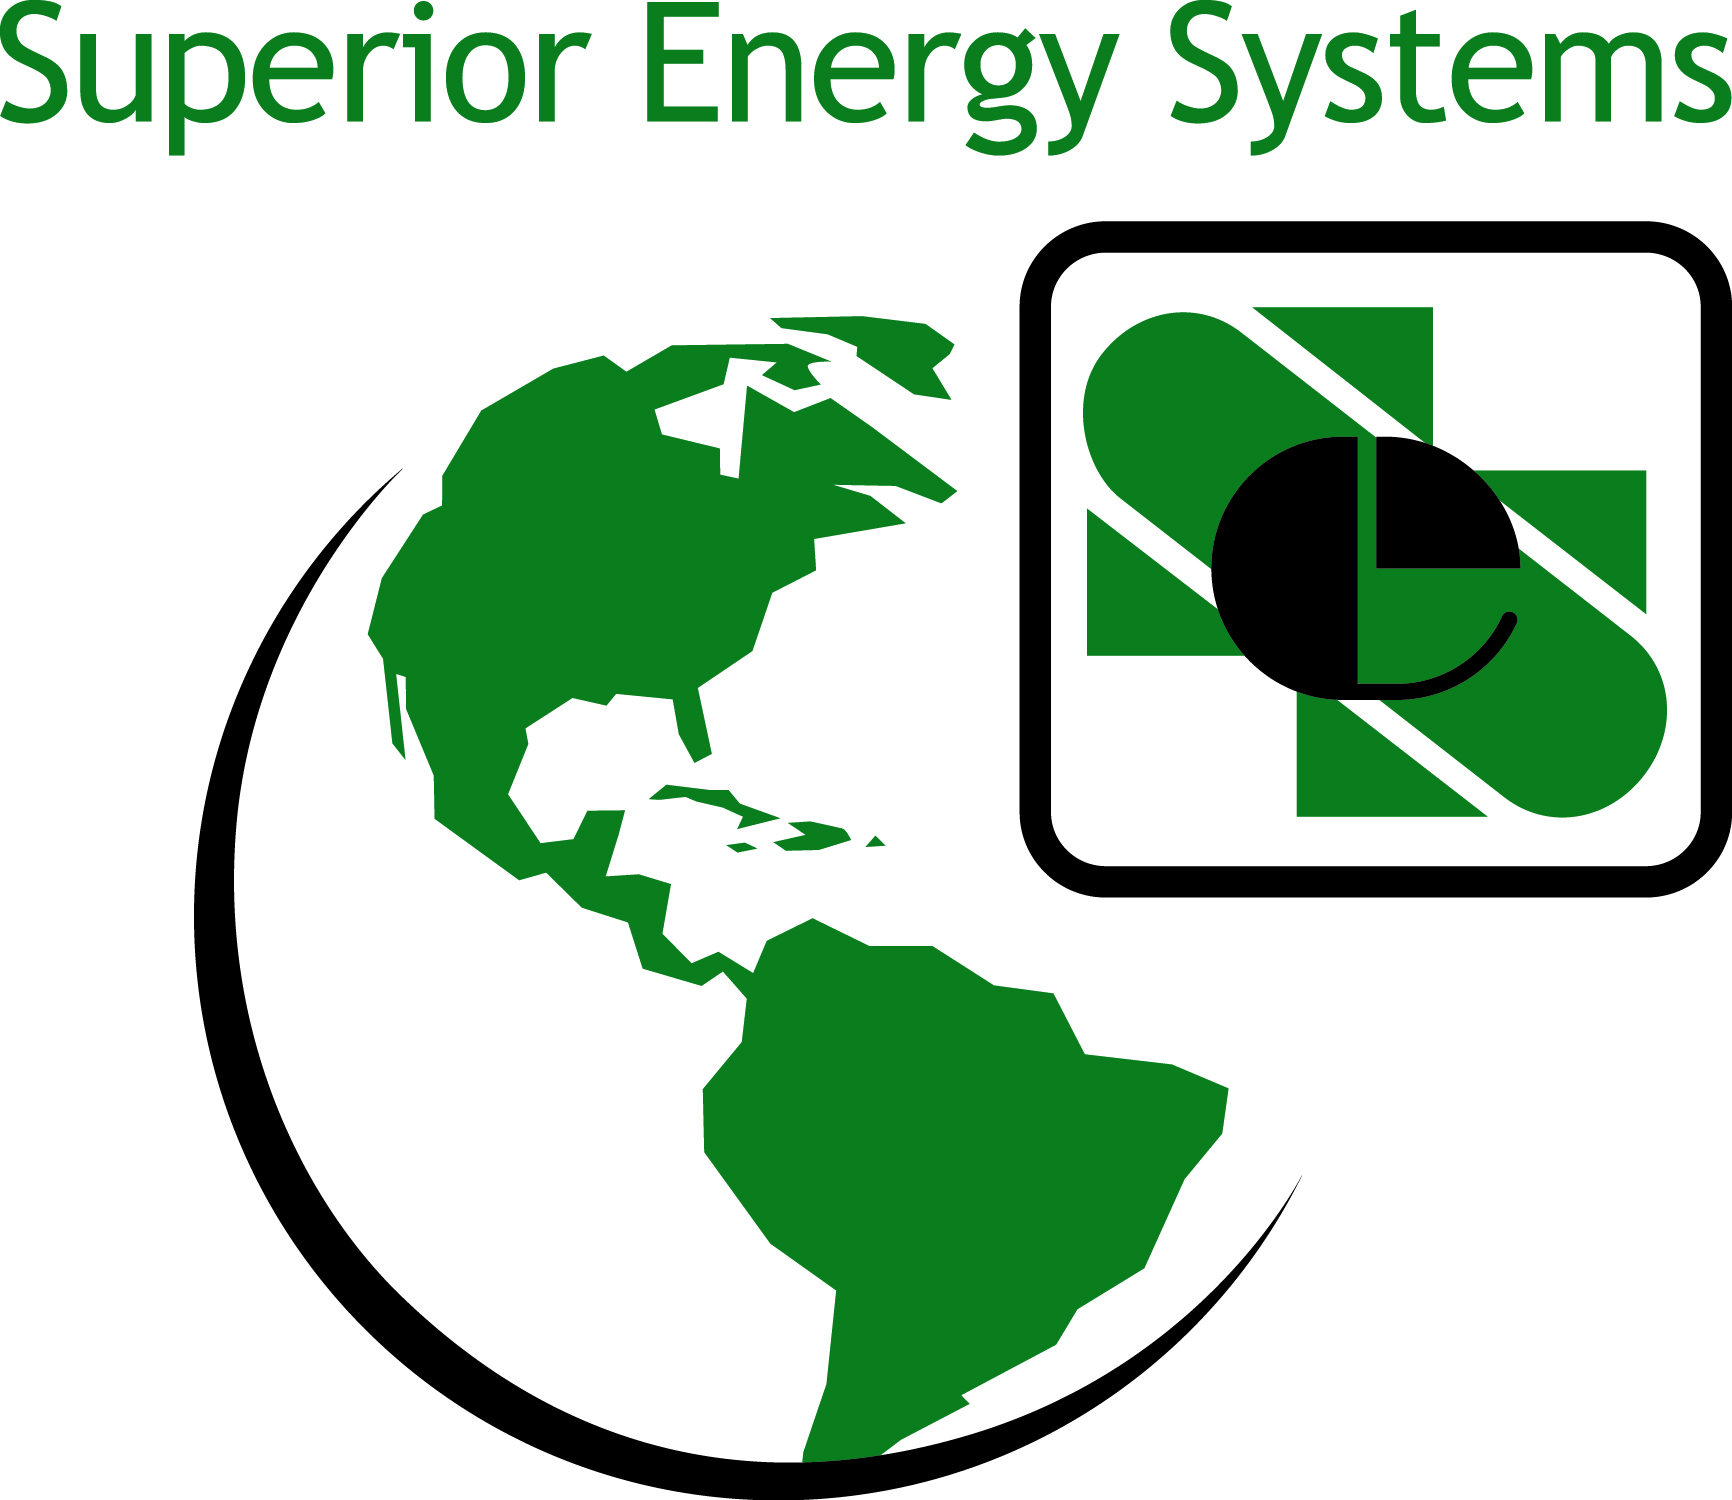 For more than 40 years, Superior Energy Systems has supplied propane infrastructure and services, bringing together engineering, manufacturing and construction expertise.